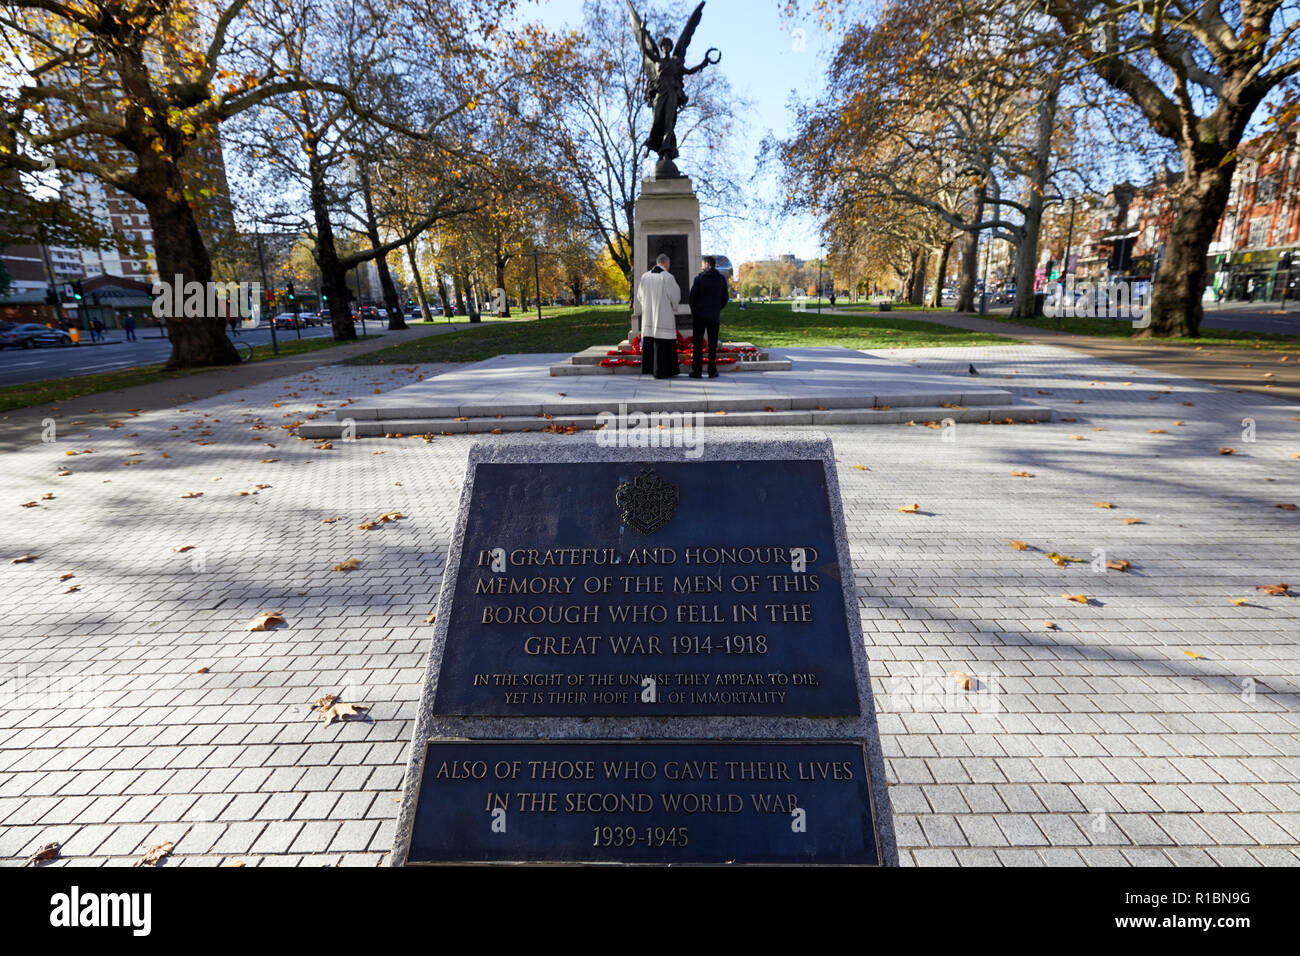 London, UK. - 11 November 2018: A man along with a local vicar reflect at the Hammersmith War Memorial on Shepherd's Bush Green on the 100th anniversary since the end of World War One. Credit: Kevin J. Frost/Alamy Live News Stock Photo